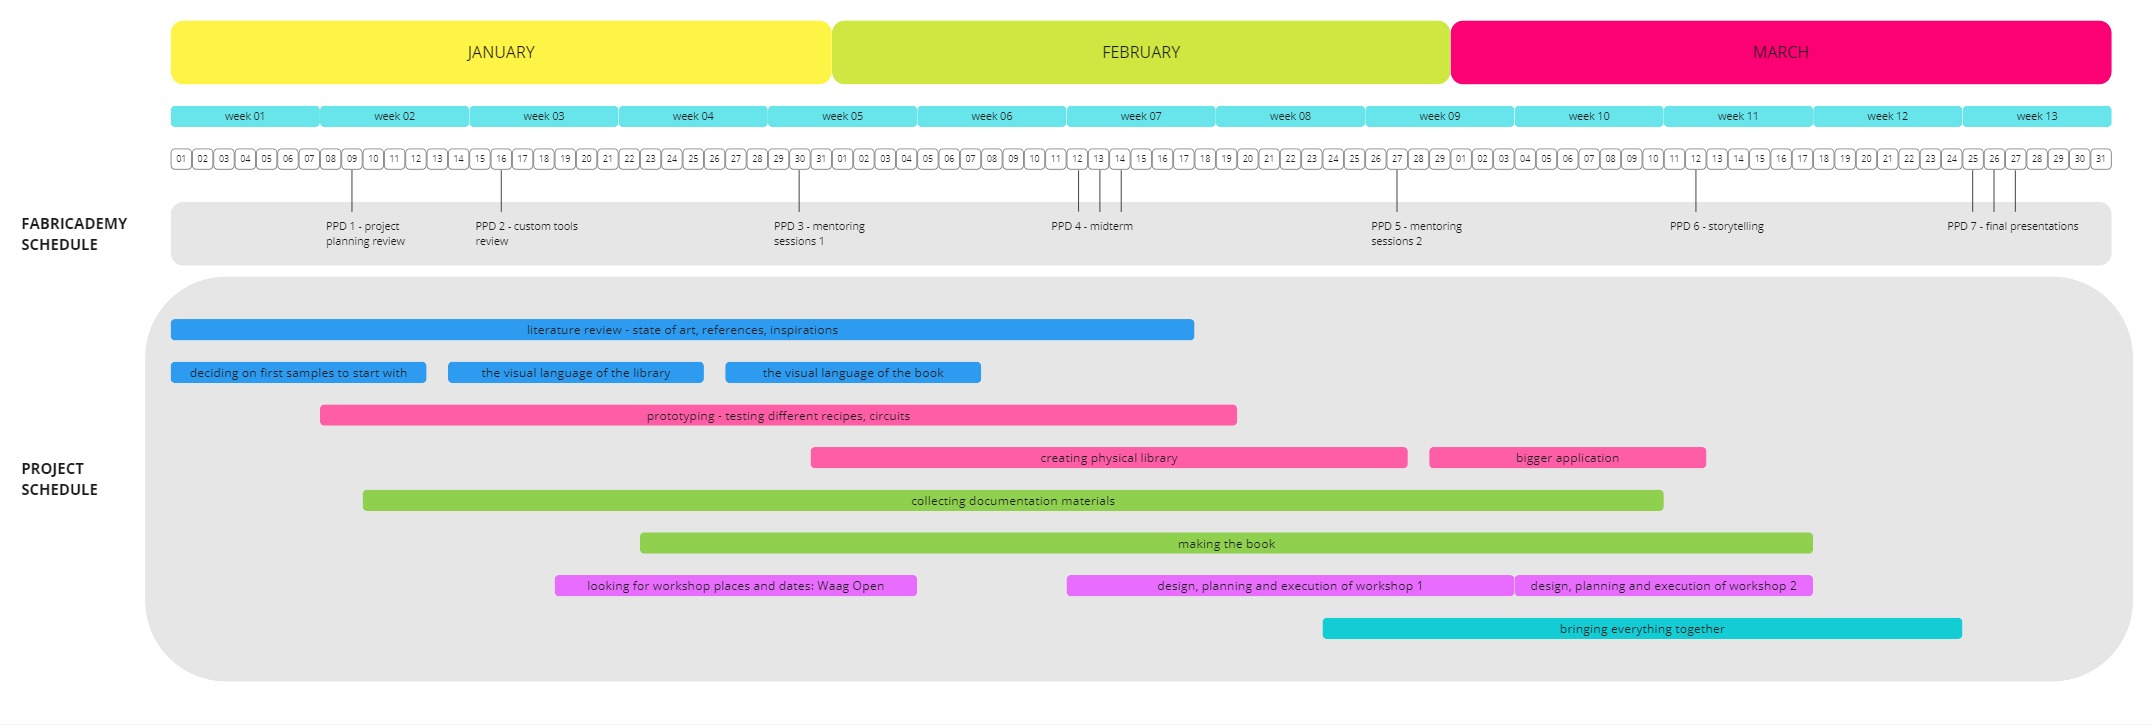 timeline of the project